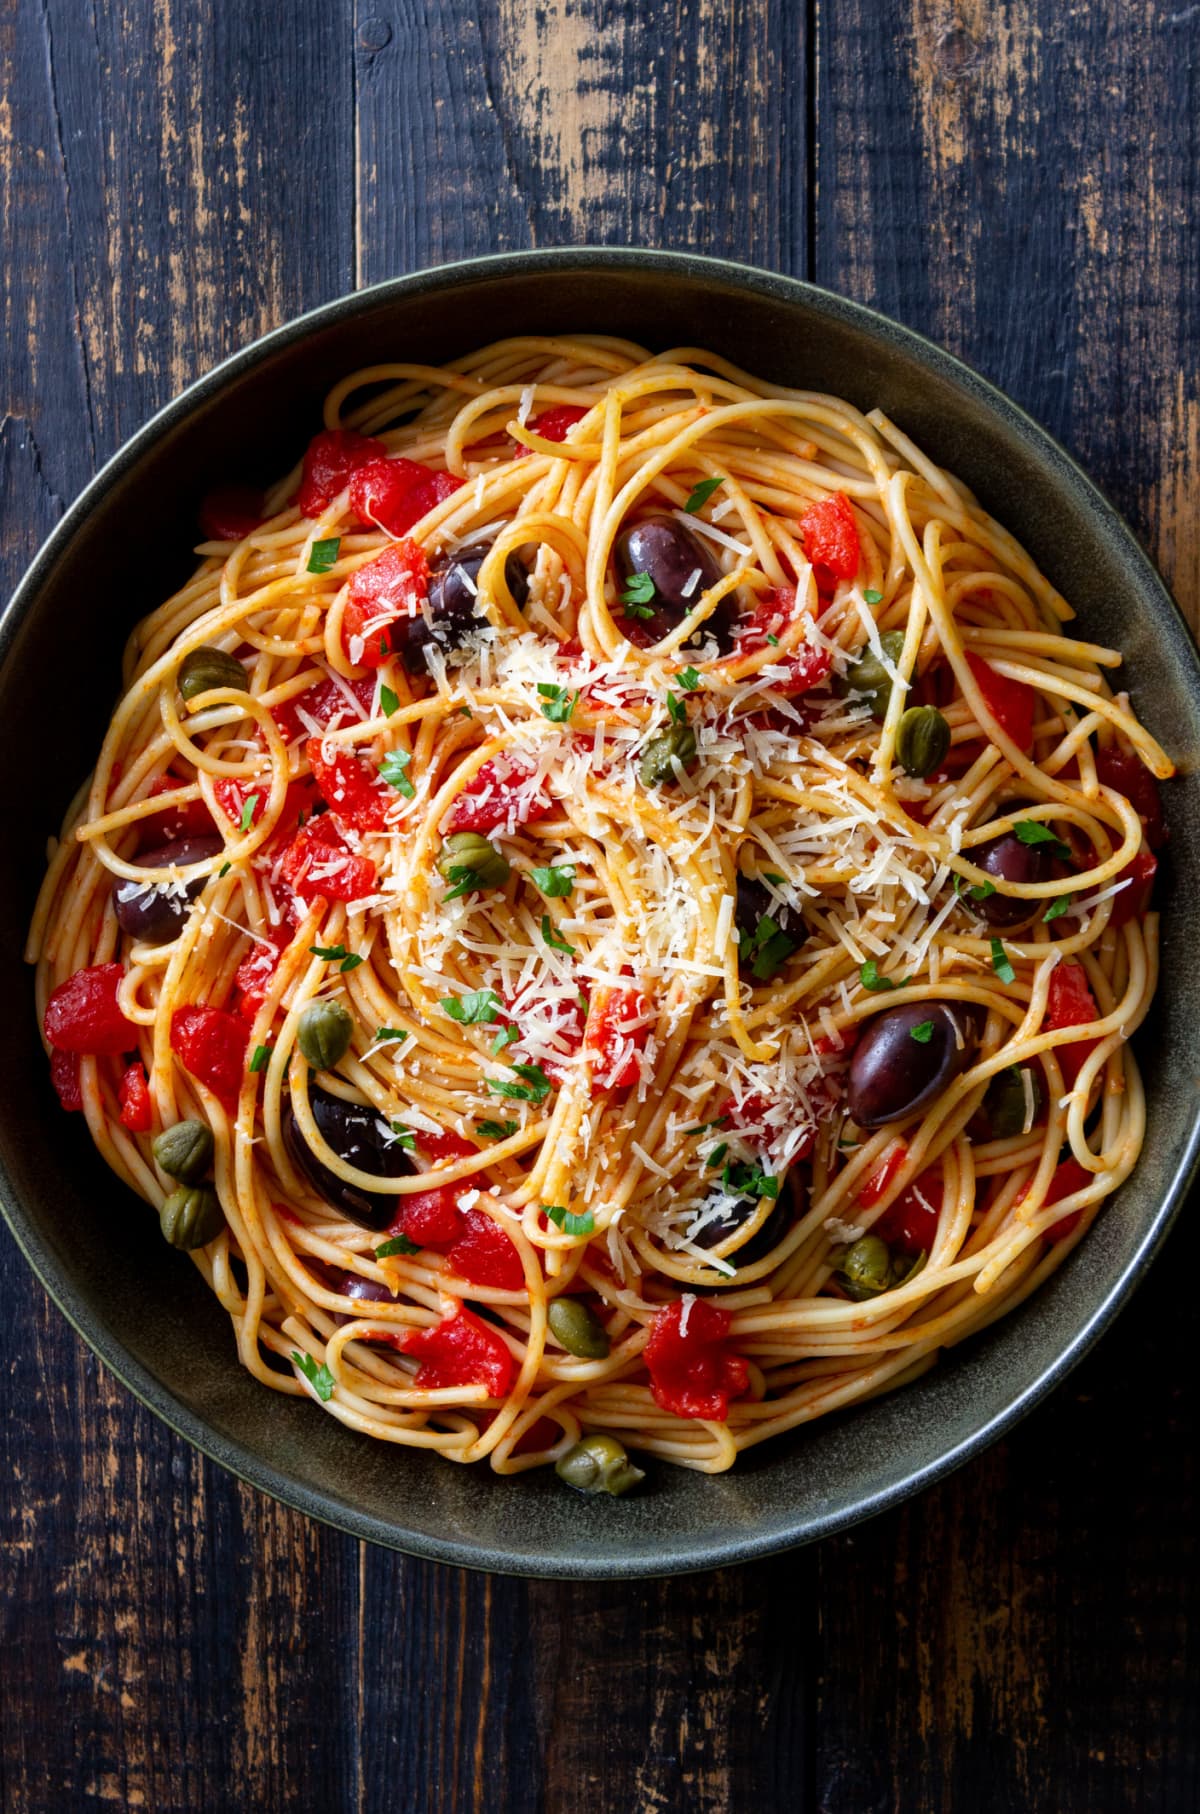 Spaghetti pasta Alla Puttanesca with capers, Kalamata olives, cheese, tomatoes, and anchovies.